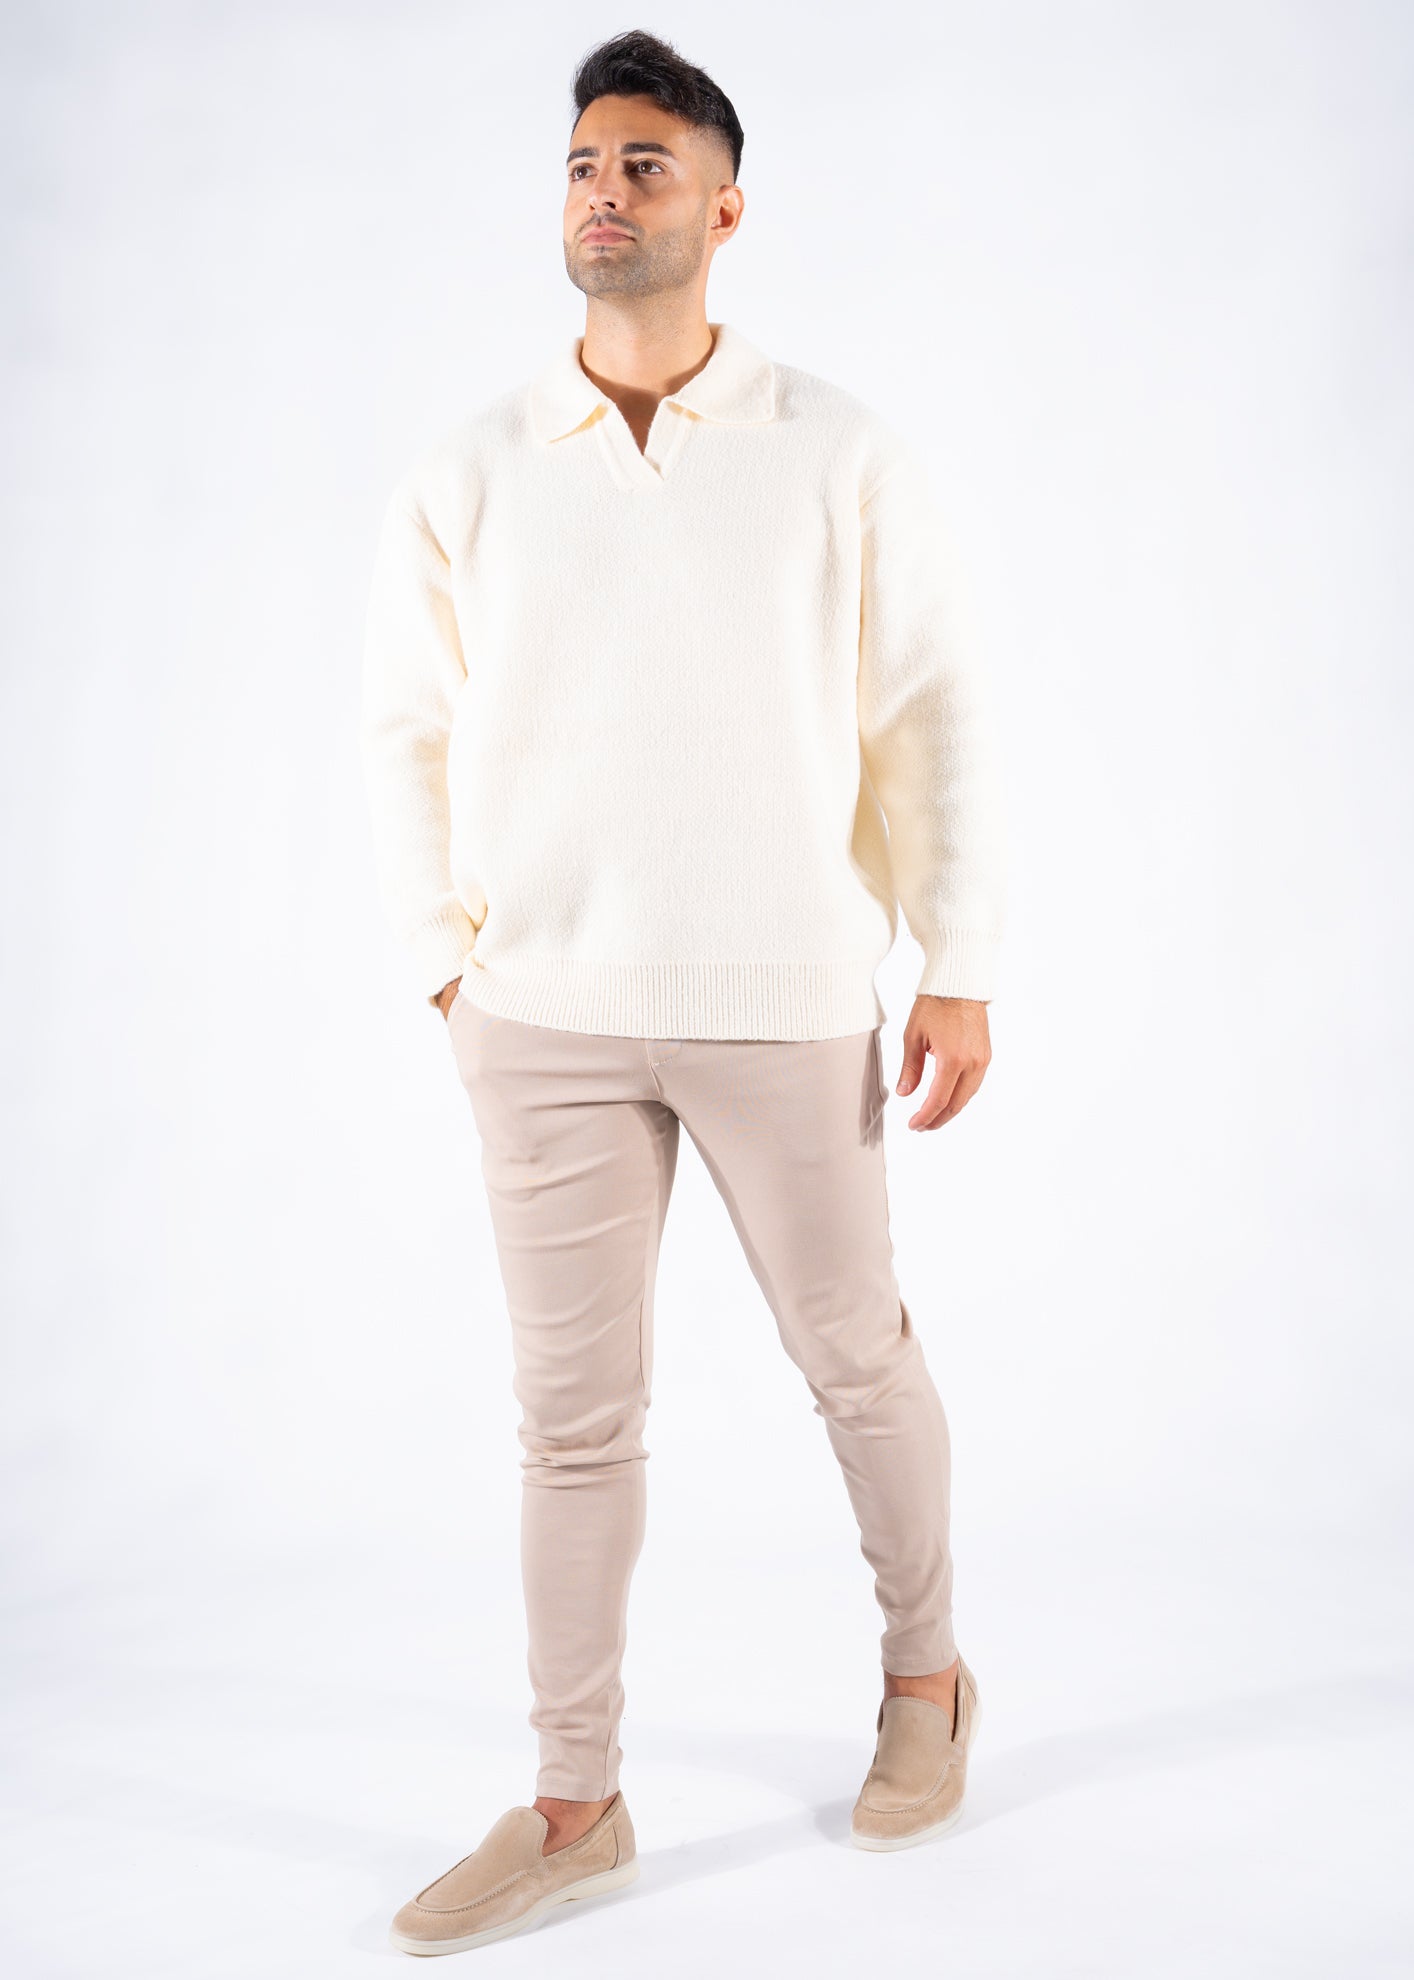 Sweater polo knitted off white oversized